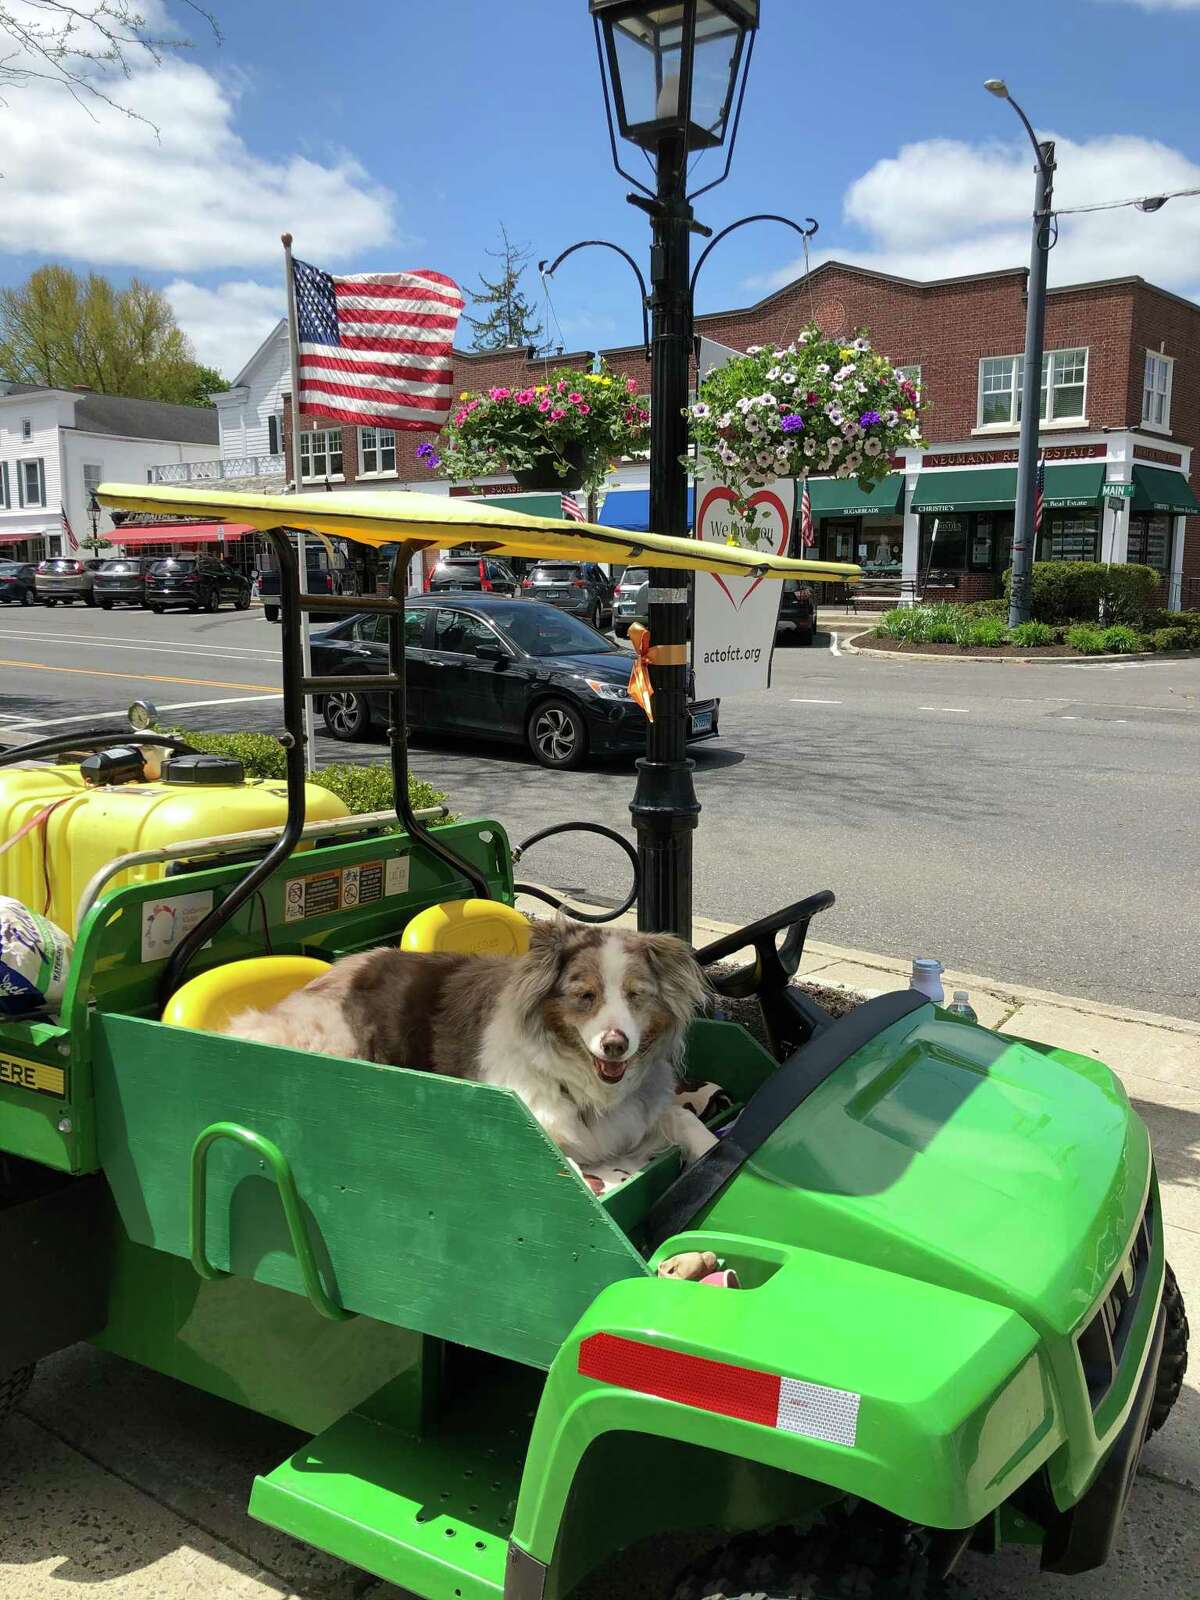 Biscuit, resting quietly in her favorite spot on the passenger seat of the Ridgefield flower lady's watering cart. “What an amazing run Biscuit had! She lived a long and fulfilling life — giving so much joy to all those that encountered her,” said Spencer Moore, whose years of employment watering the flower baskets hanging from lamposts in the village has earned her the title “the flower lady.” Biscuit, a brown and white Australian Shepherd of gentle and mellow and temperament, was Moore’s constant companion on her rounds the last nine years, sitting quietly on the modified golf cart that carried the flower lady’s watering rig. She died Nov. 13 at the age of 15.